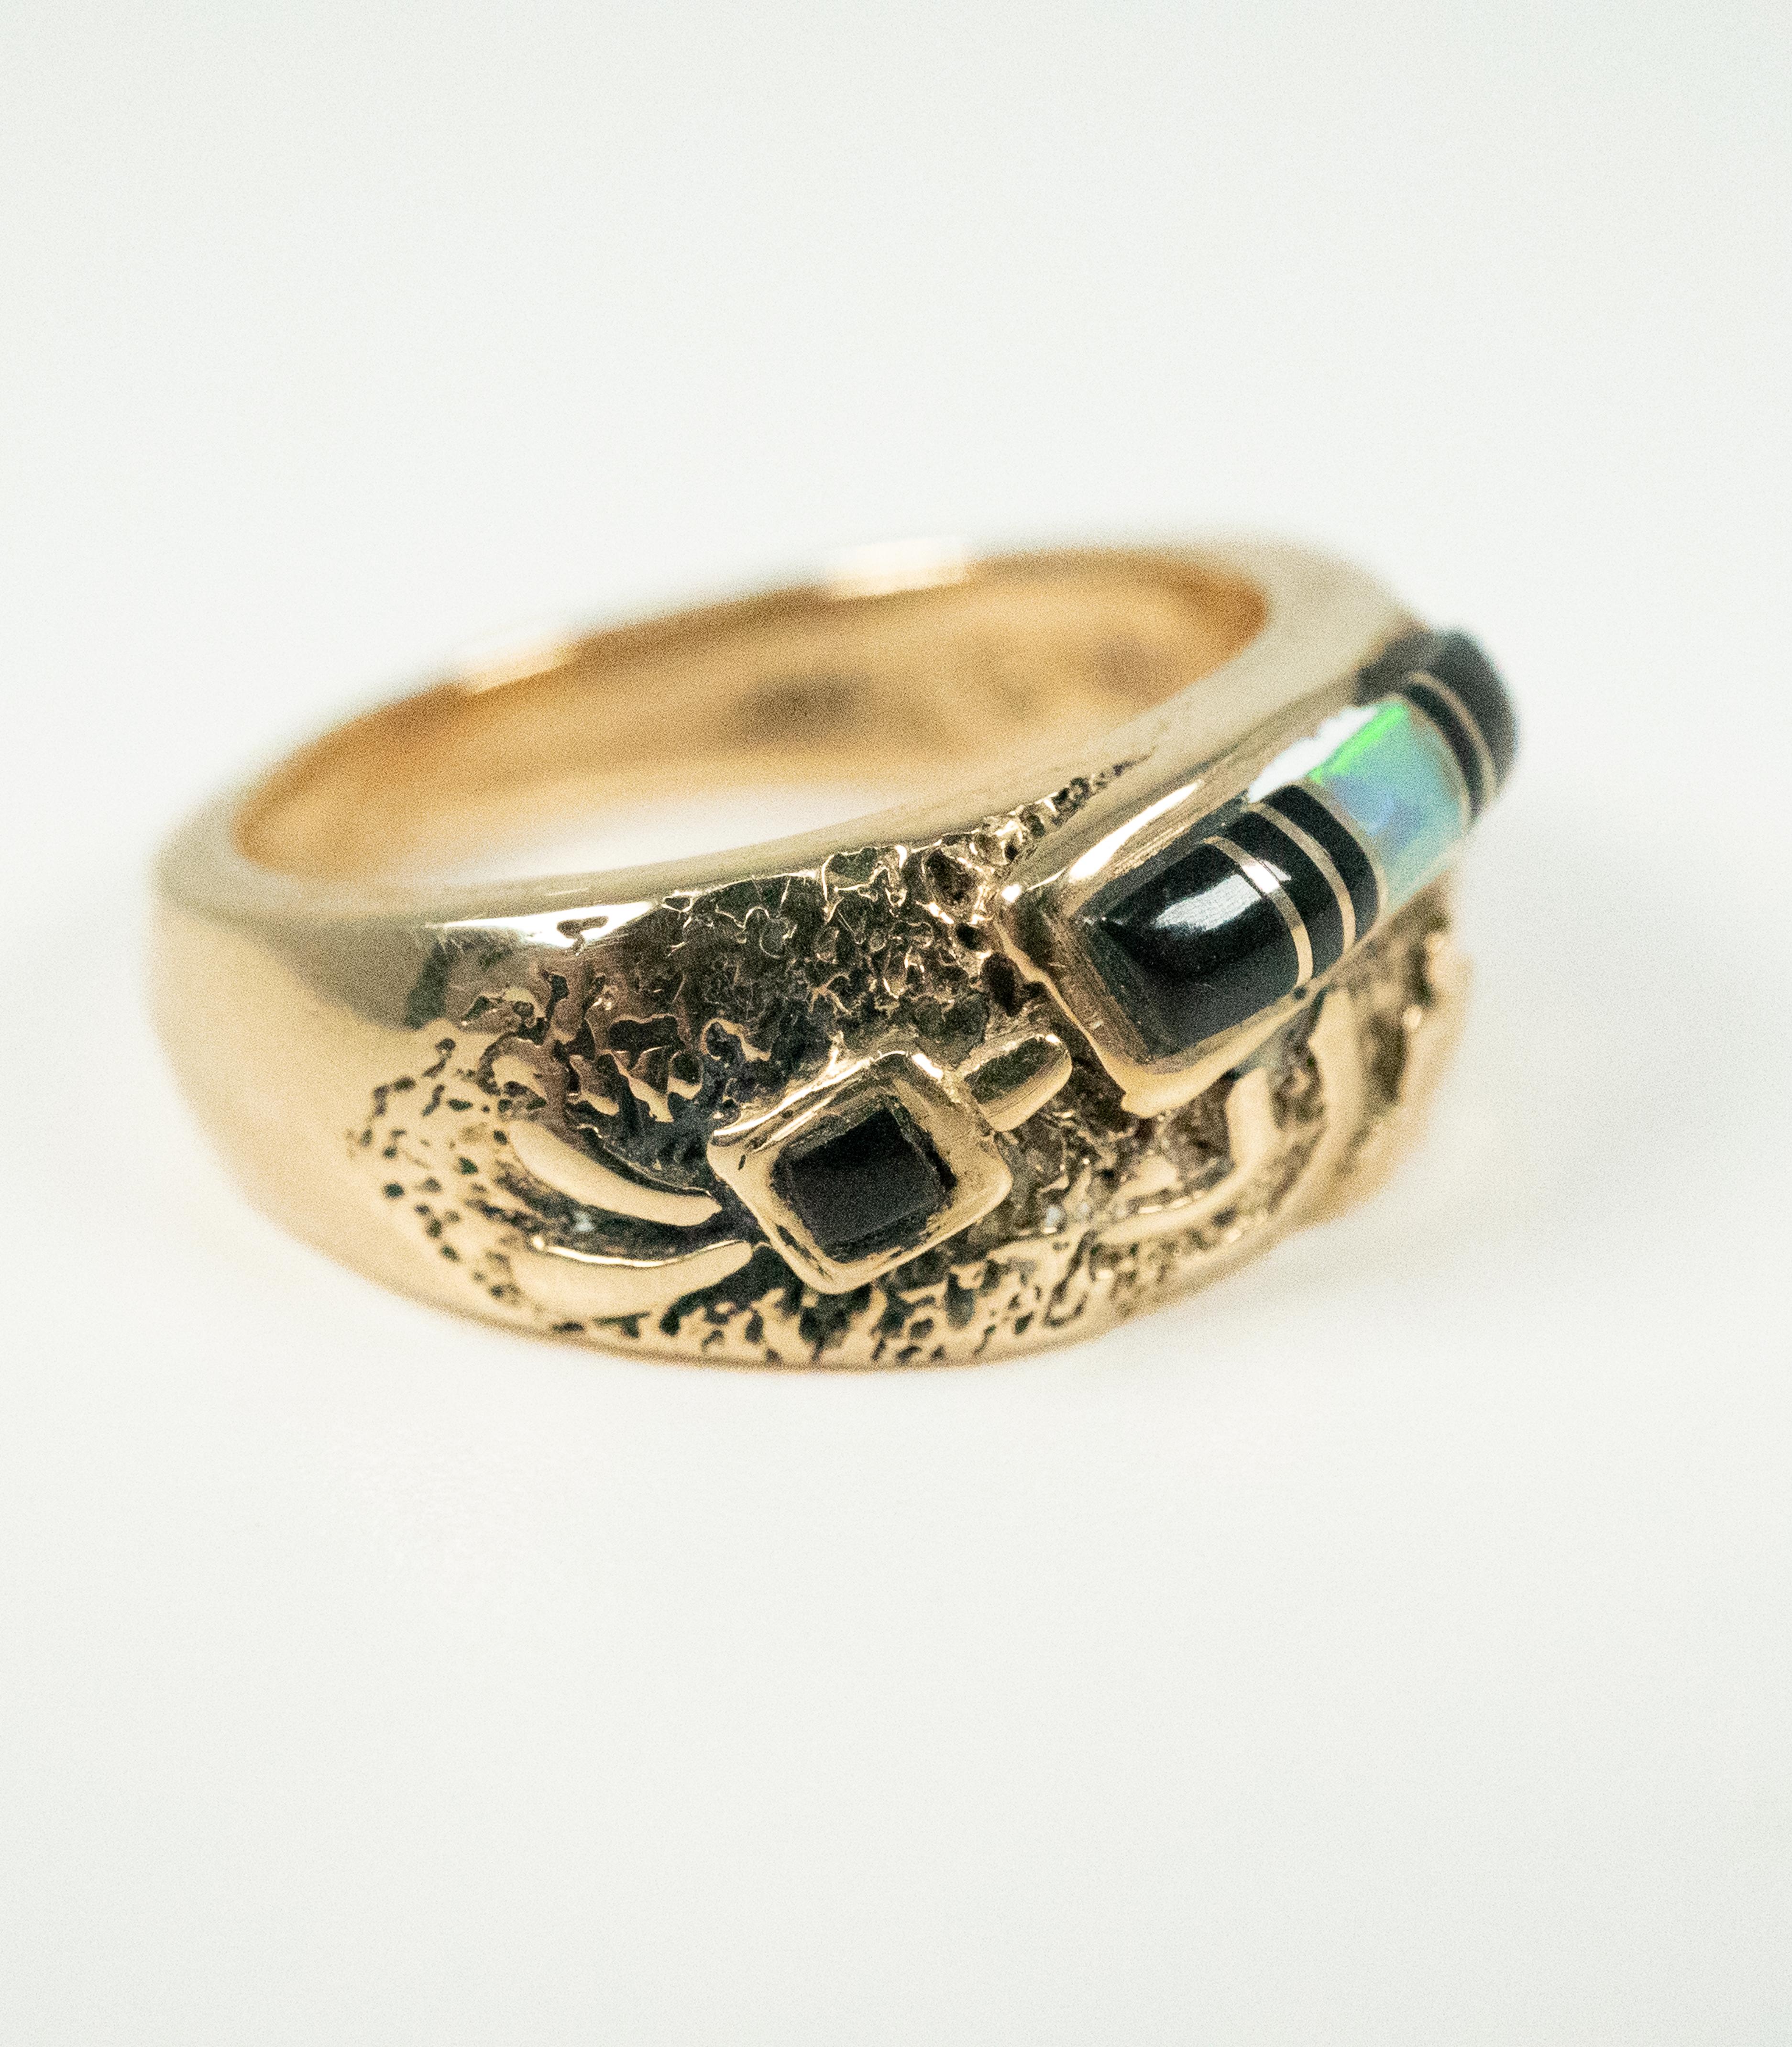 A very unusual ring, with a beautiful inlay of black onyx and opal!